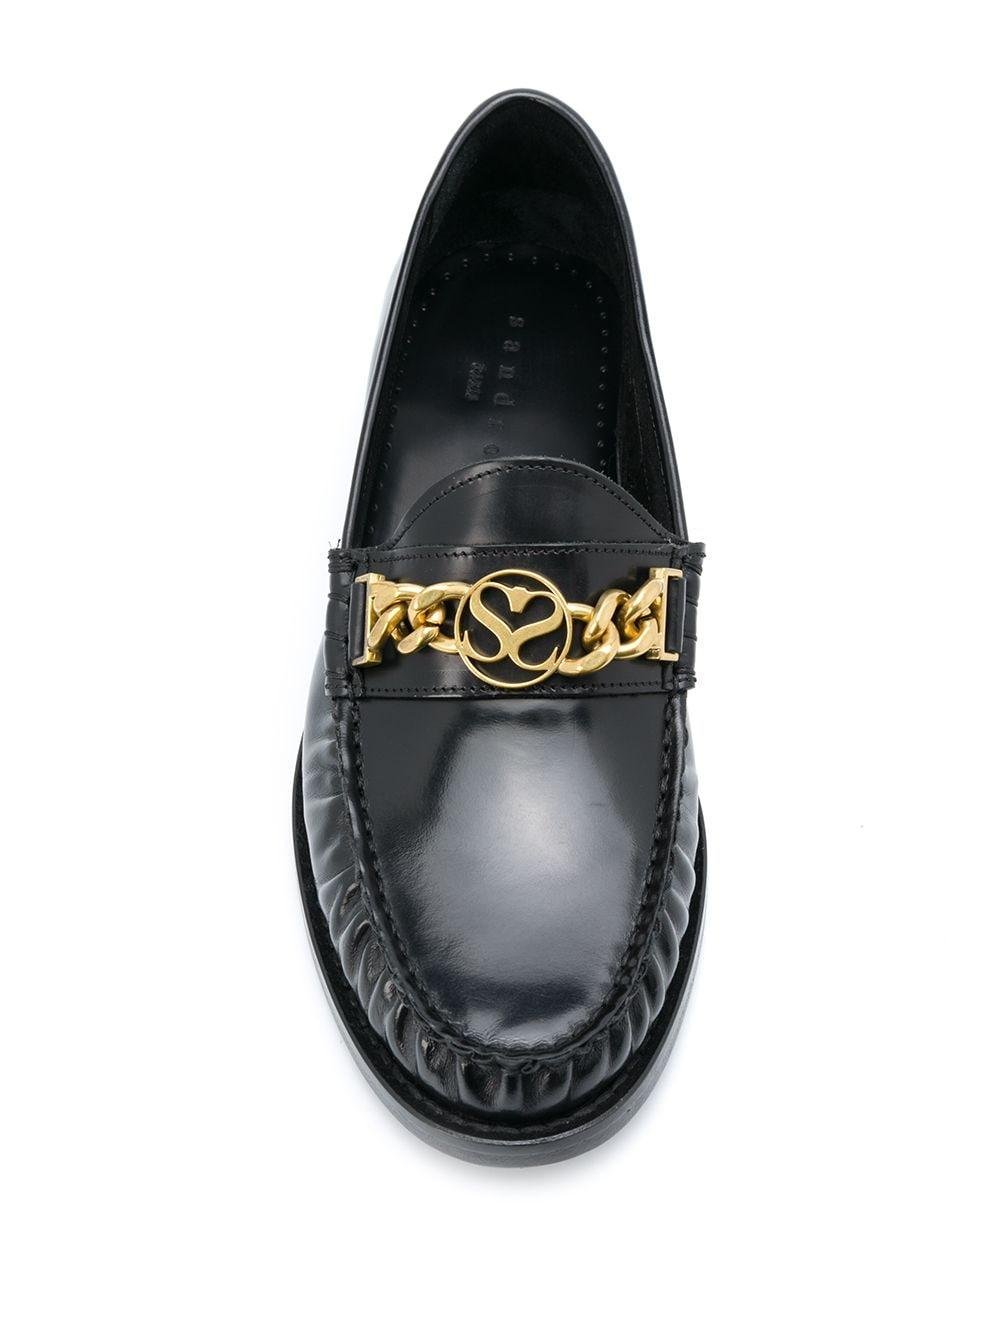 Sandro Chain-embellished Loafers in Black | Lyst